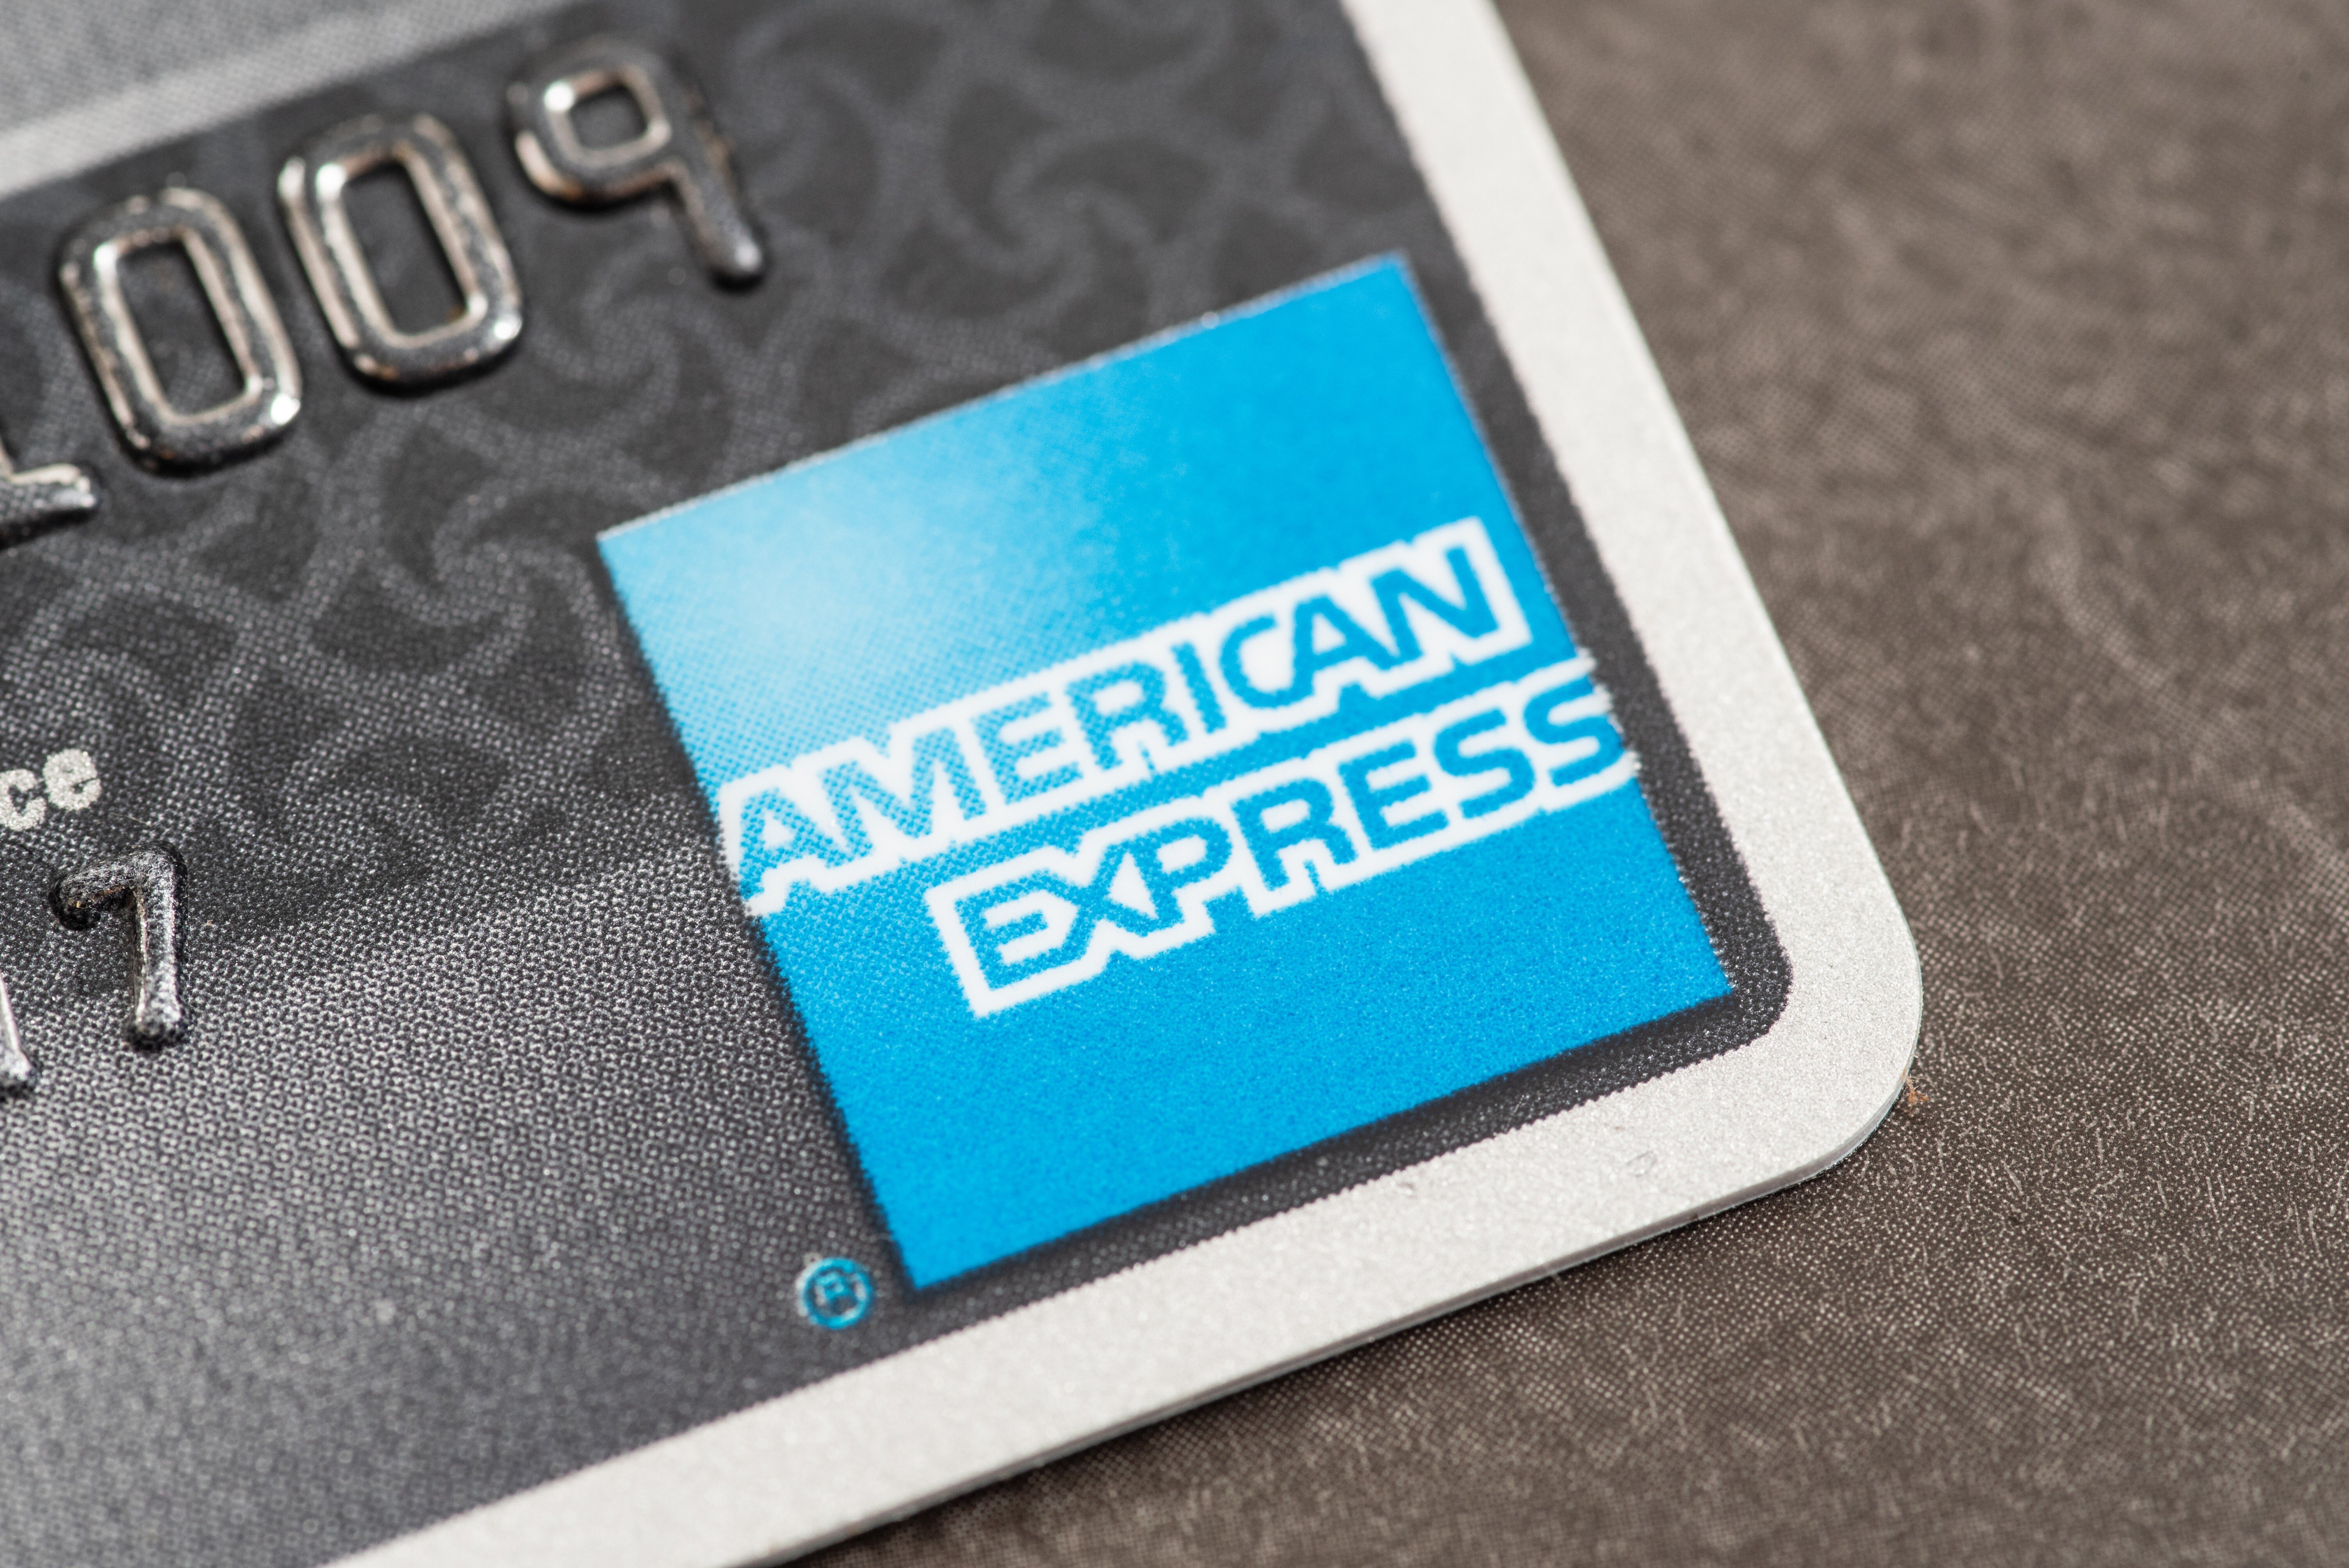 American Express: new yuan card settlement network promotes global use of  China's currency | South China Morning Post